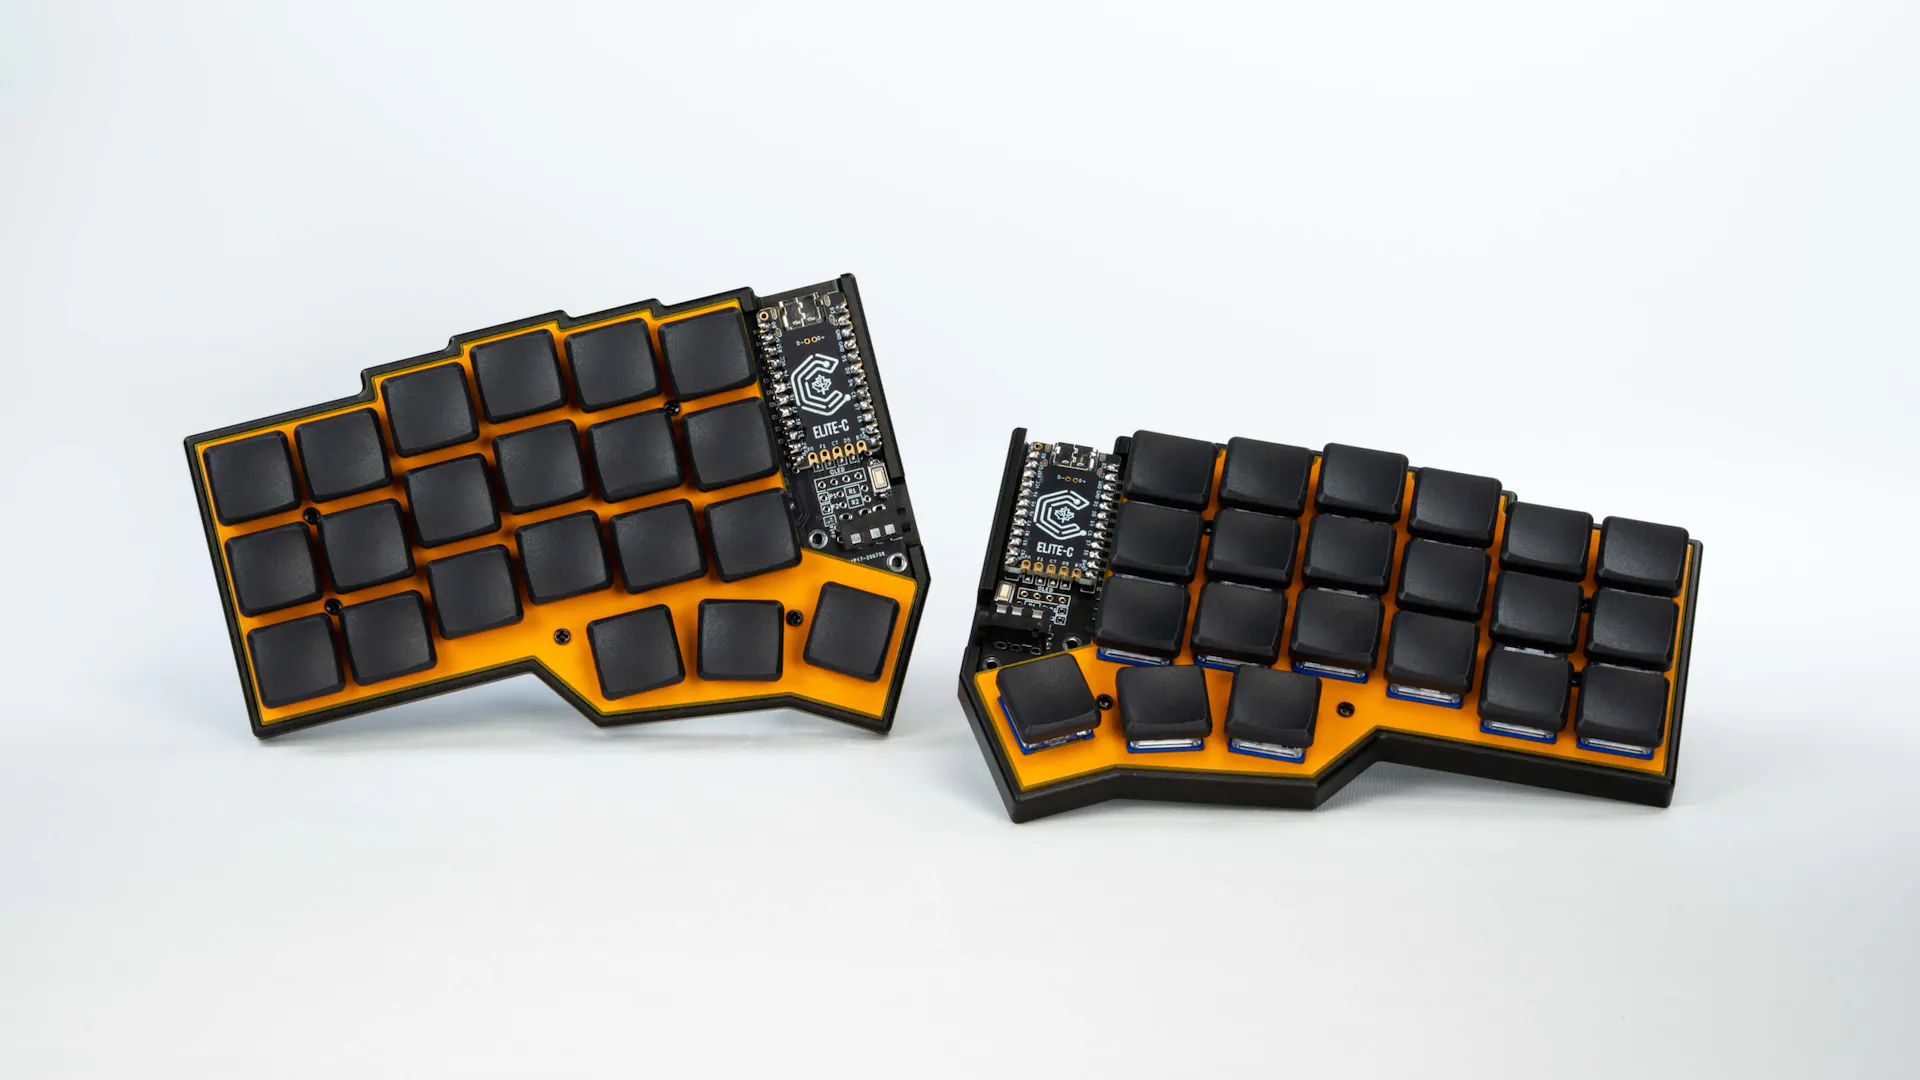 Small, split keyboard with a yellow bottom and blank black keys.